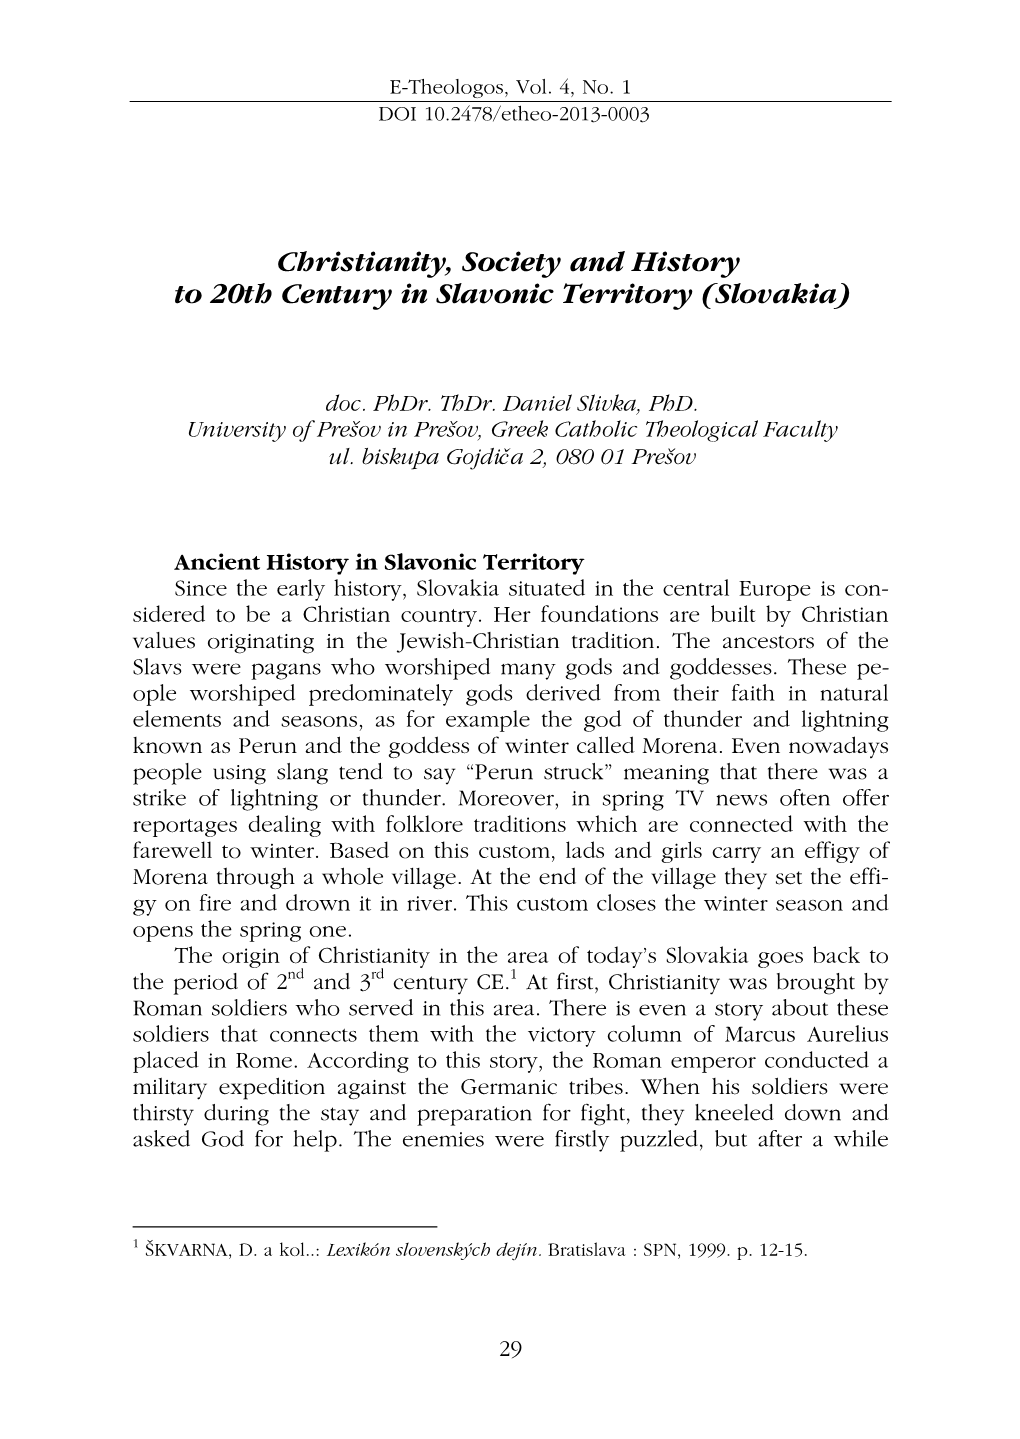 Christianity, Society and History to 20Th Century in Slavonic Territory (Slovakia)